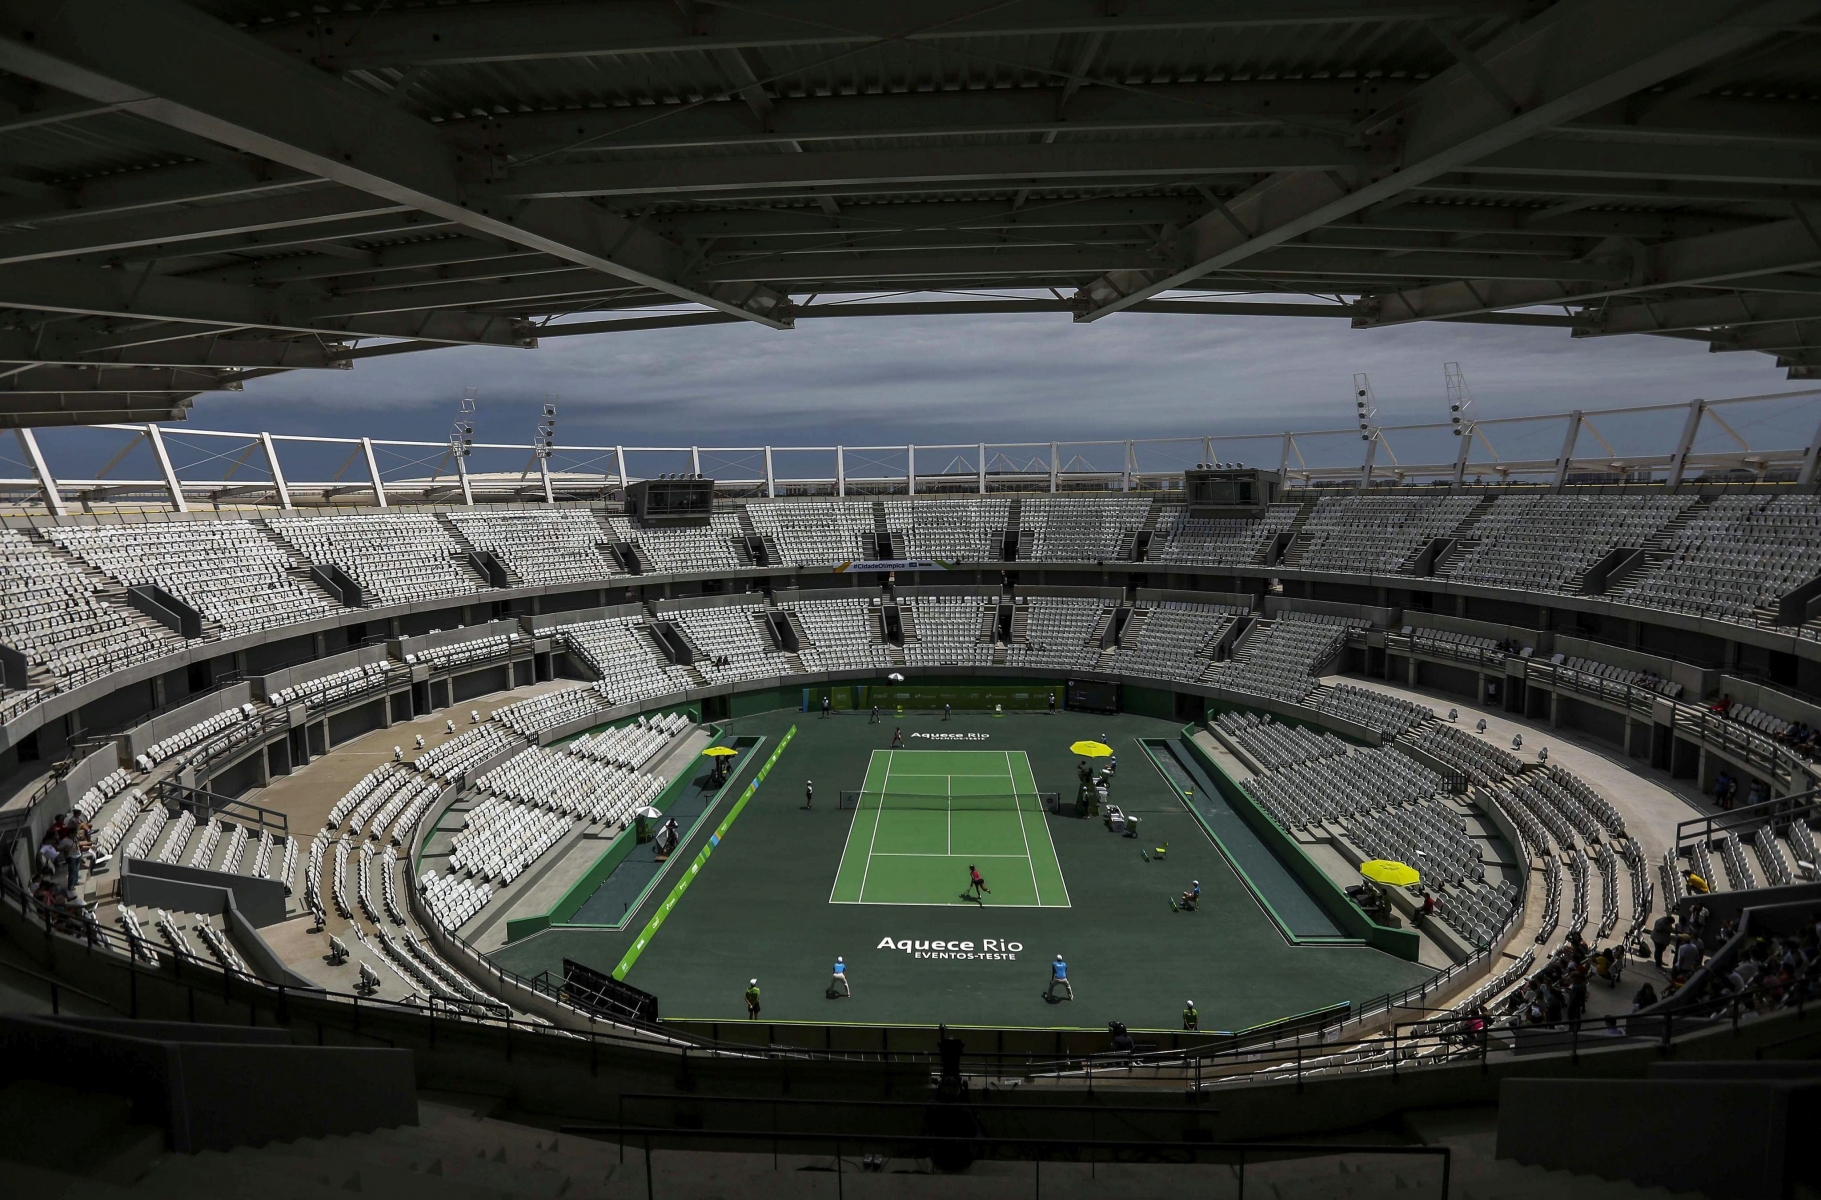 epa05065428 Photo of the tennis venue at the Olympic Park for the Games Rio 2016 in Rio de Janeiro, Brazil, on 11 December 2015. The Olympic center is in testing phase as part of the event 'Aquece Rio'.  EPA/Antonio Lacerda